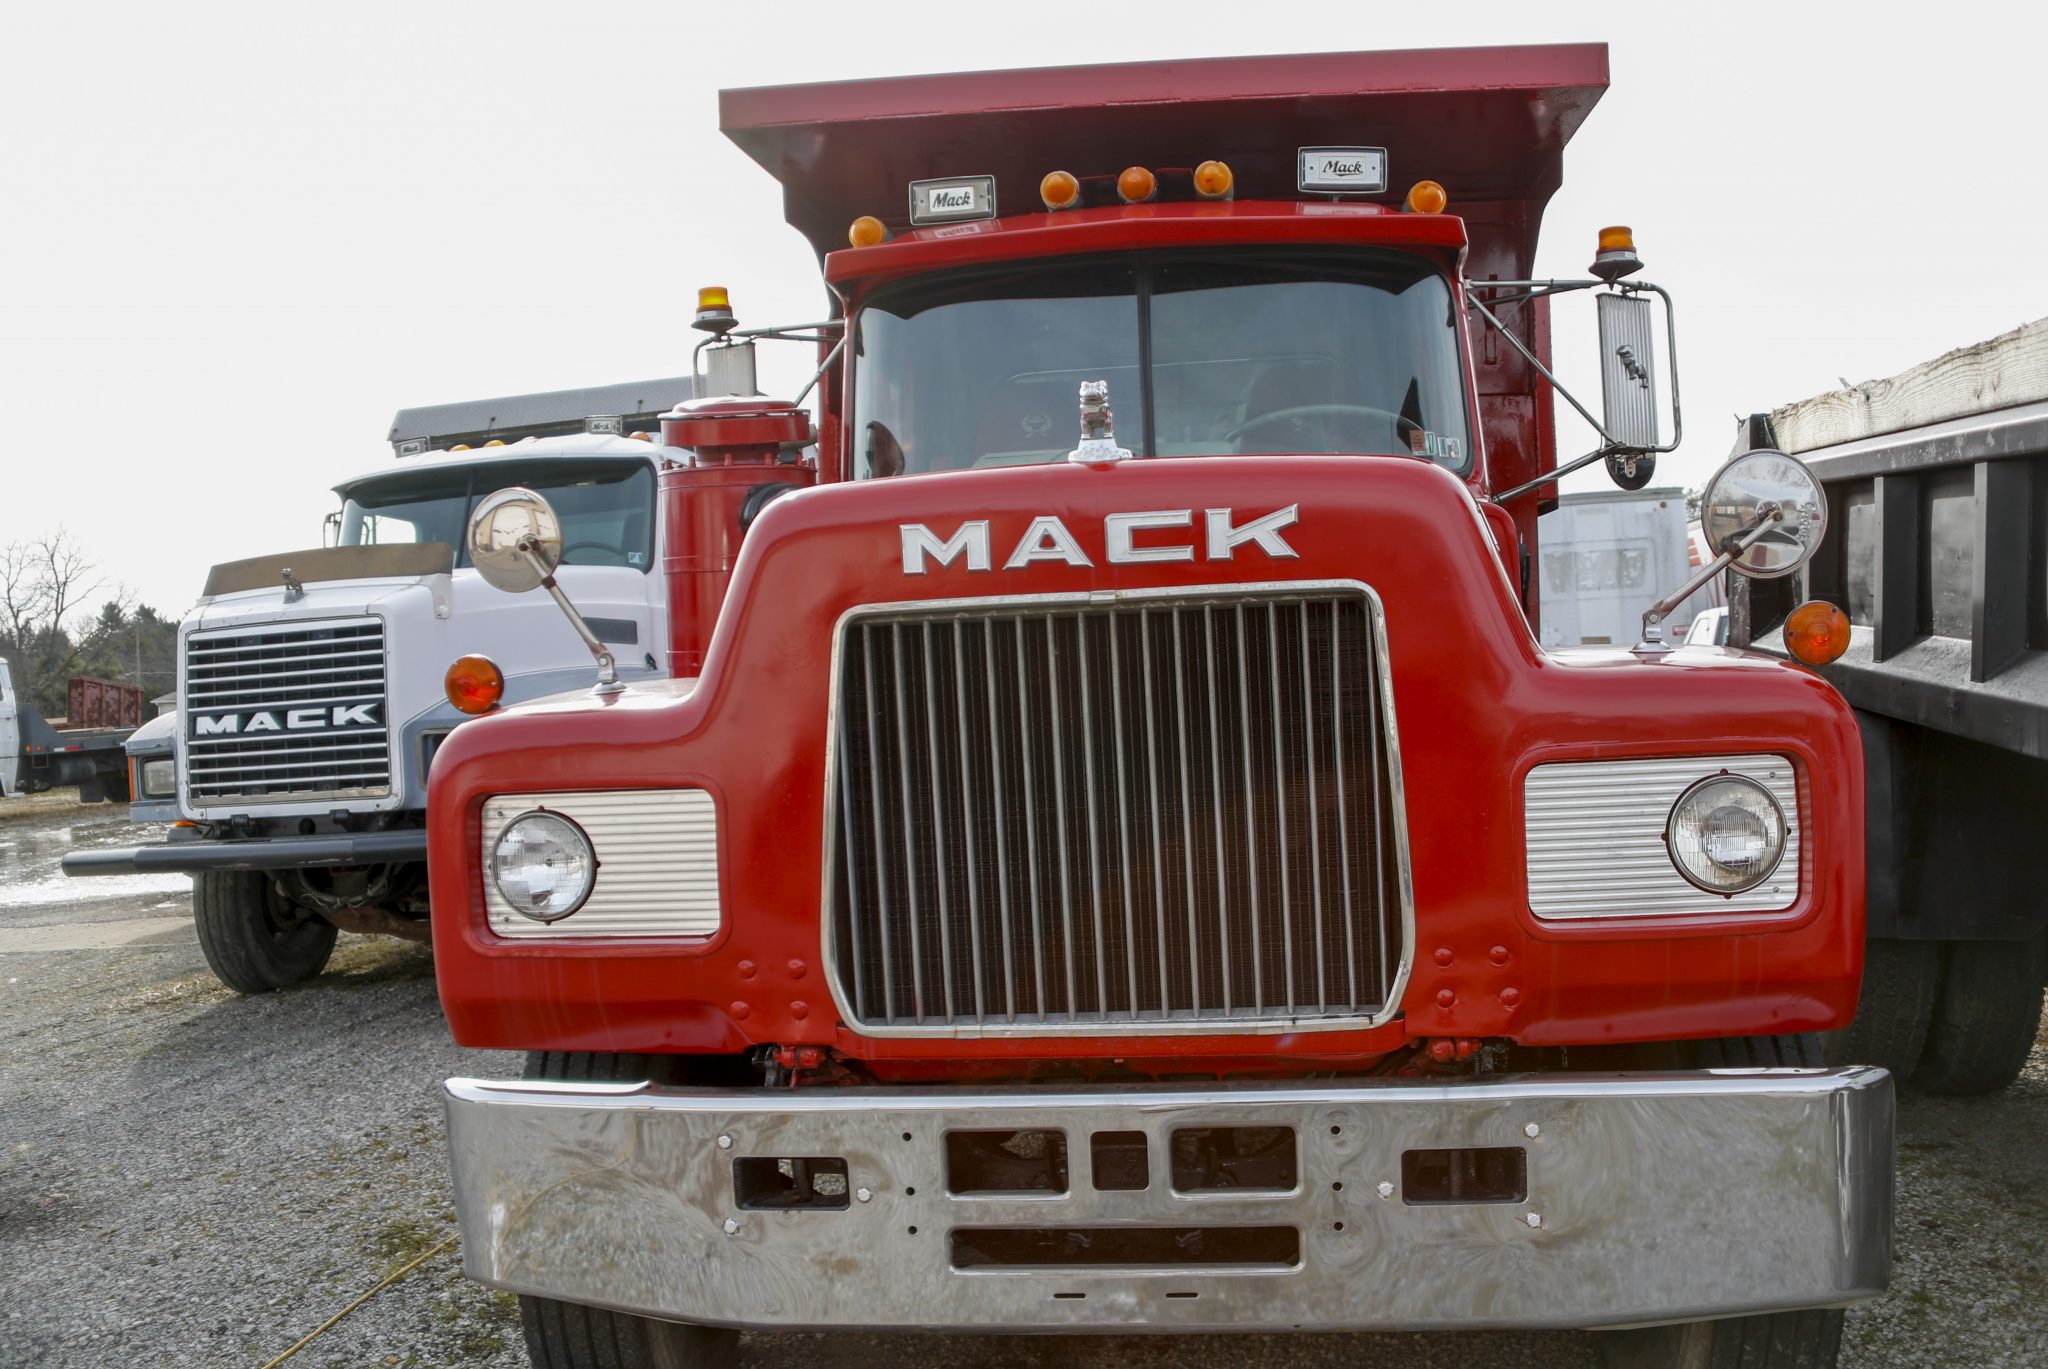 Union workers at Mack Trucks have voted down a tentative five-year contract agreement reached with the company.